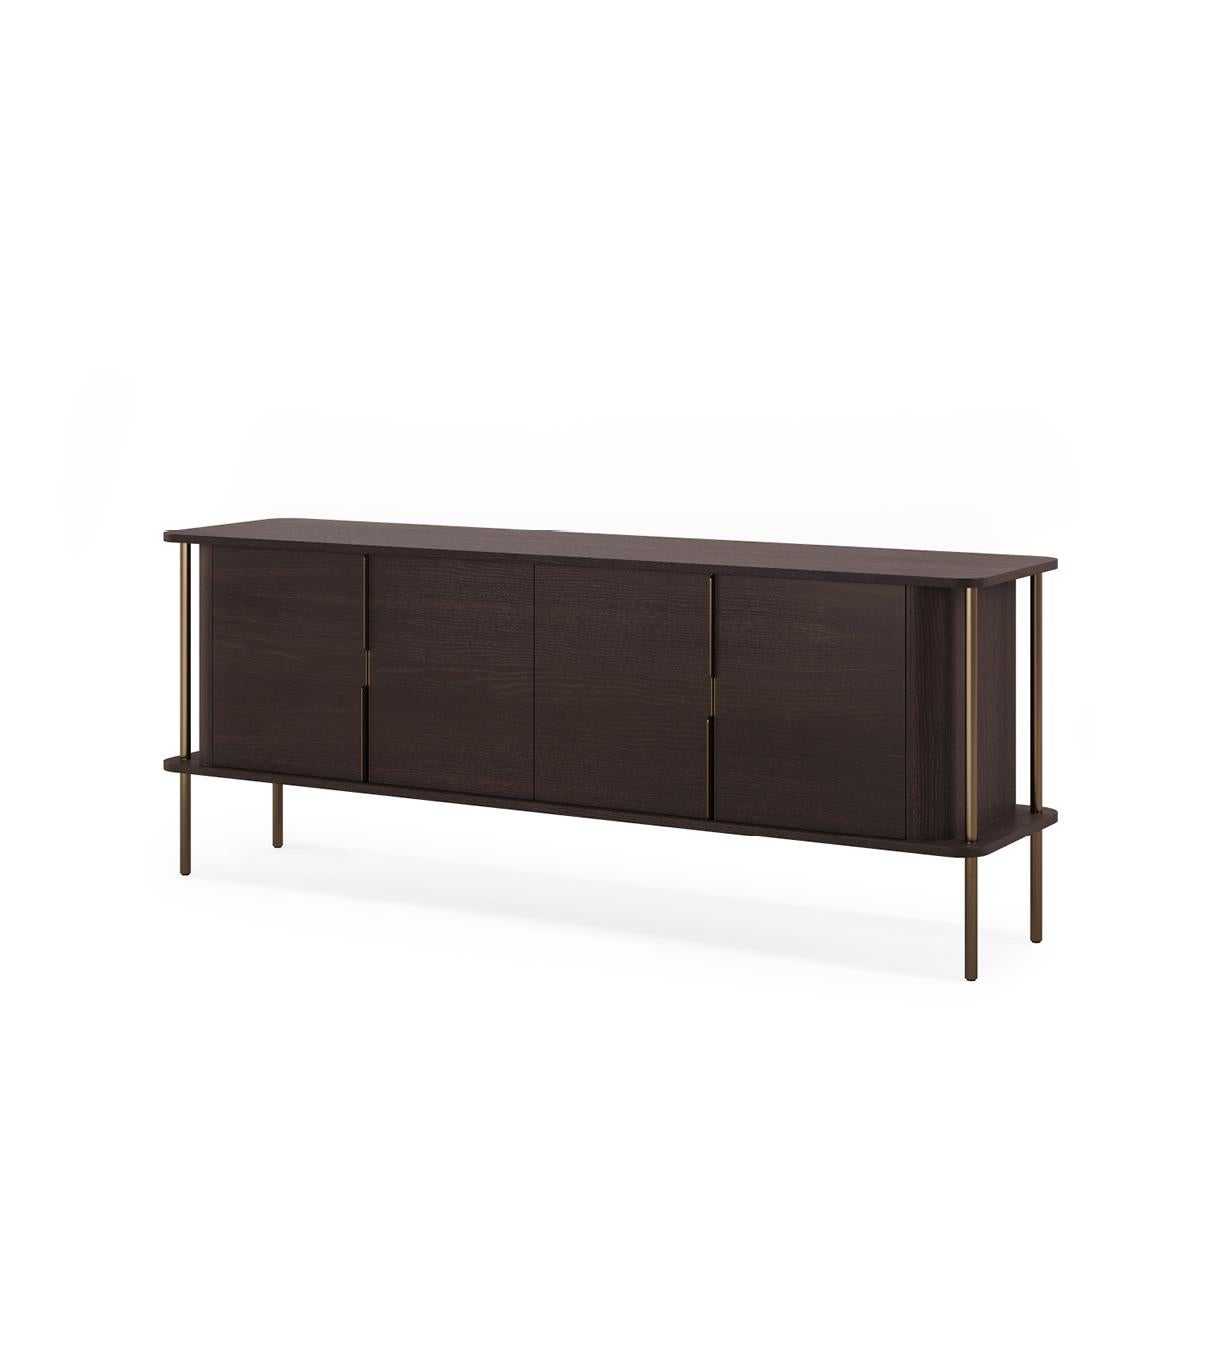 Portuguese ZAGAS Statera Sideboard For Sale